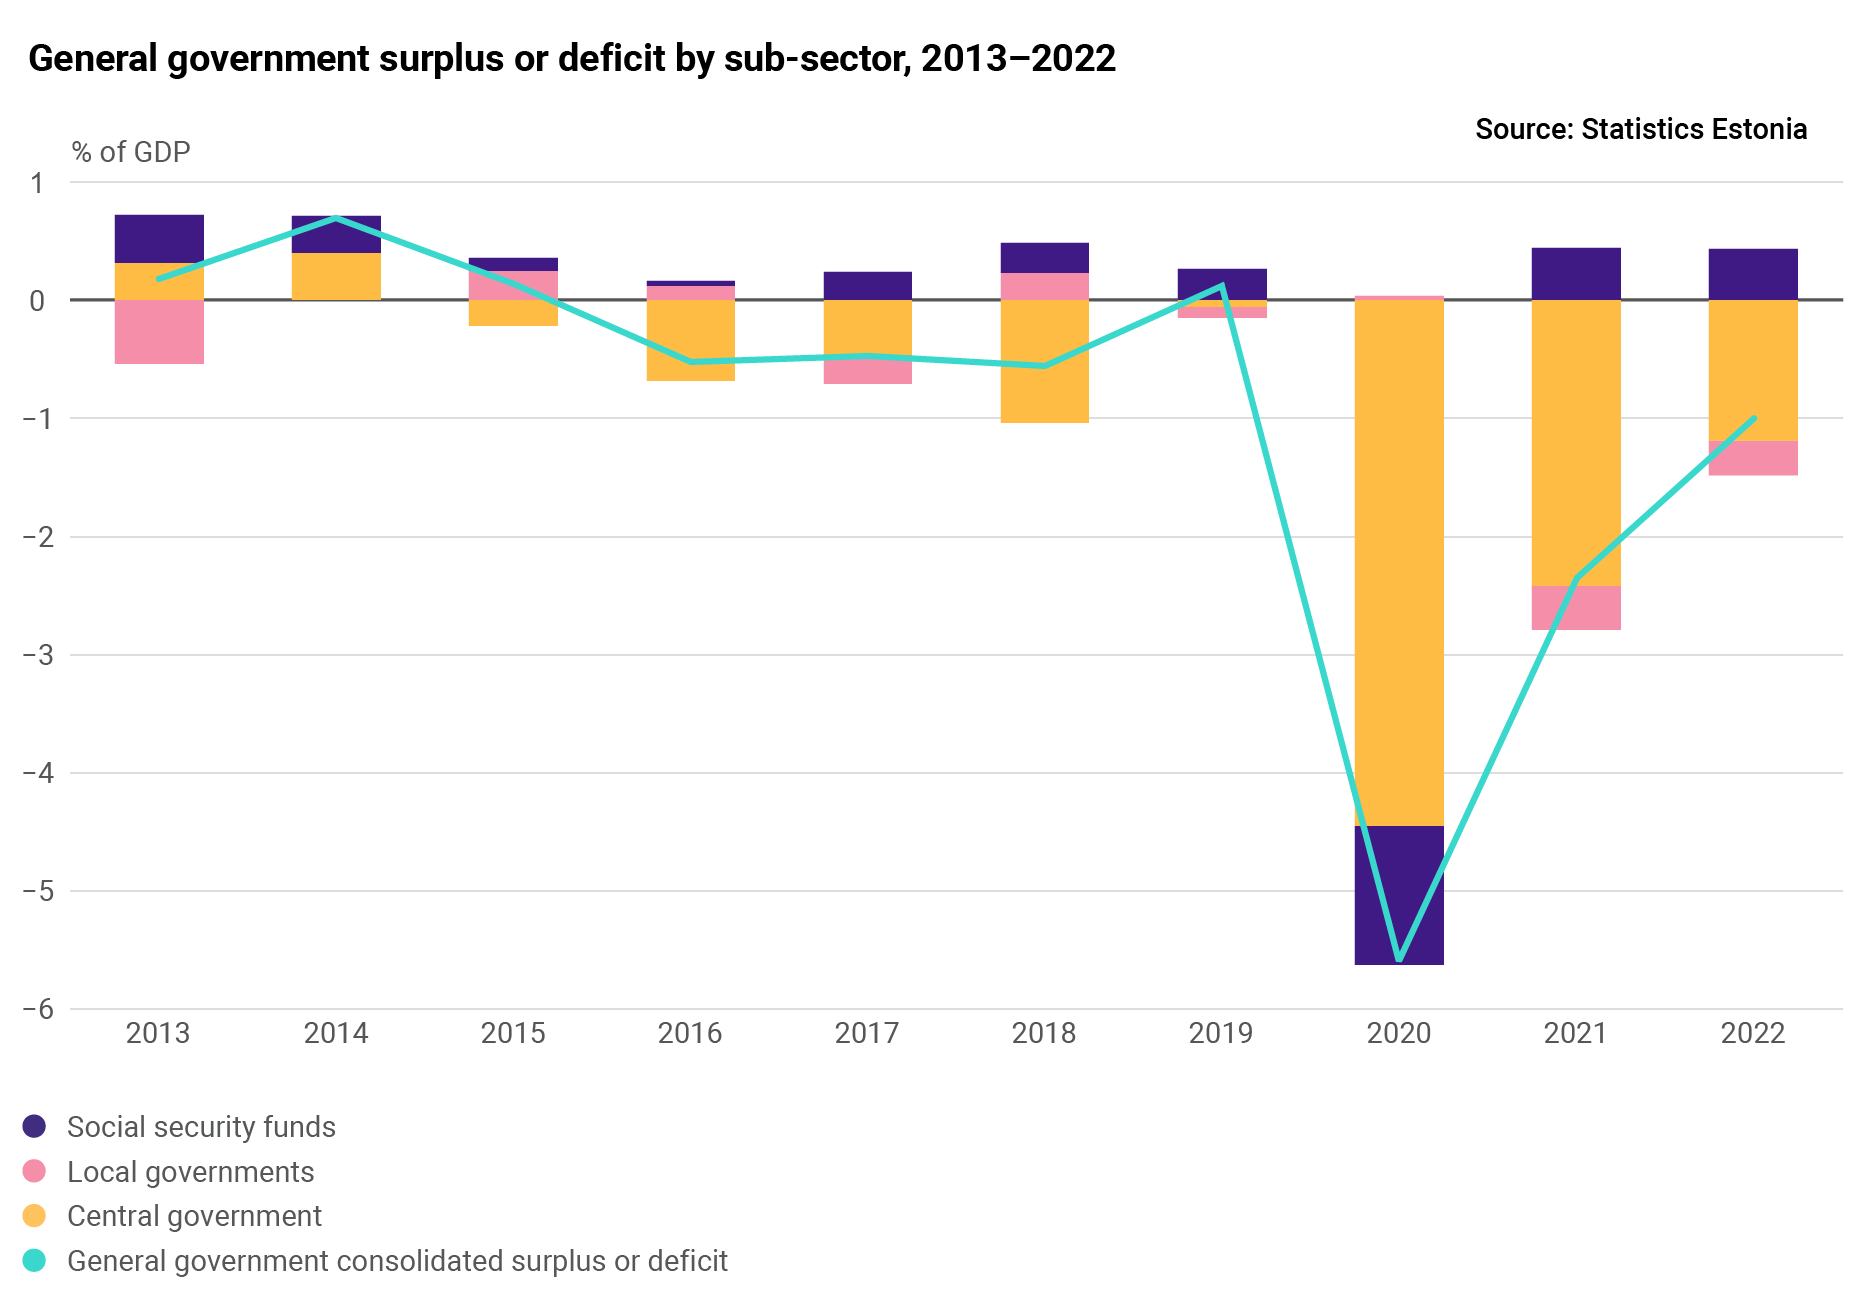 General government surplus or deficit by sub-sector, 2013-2022